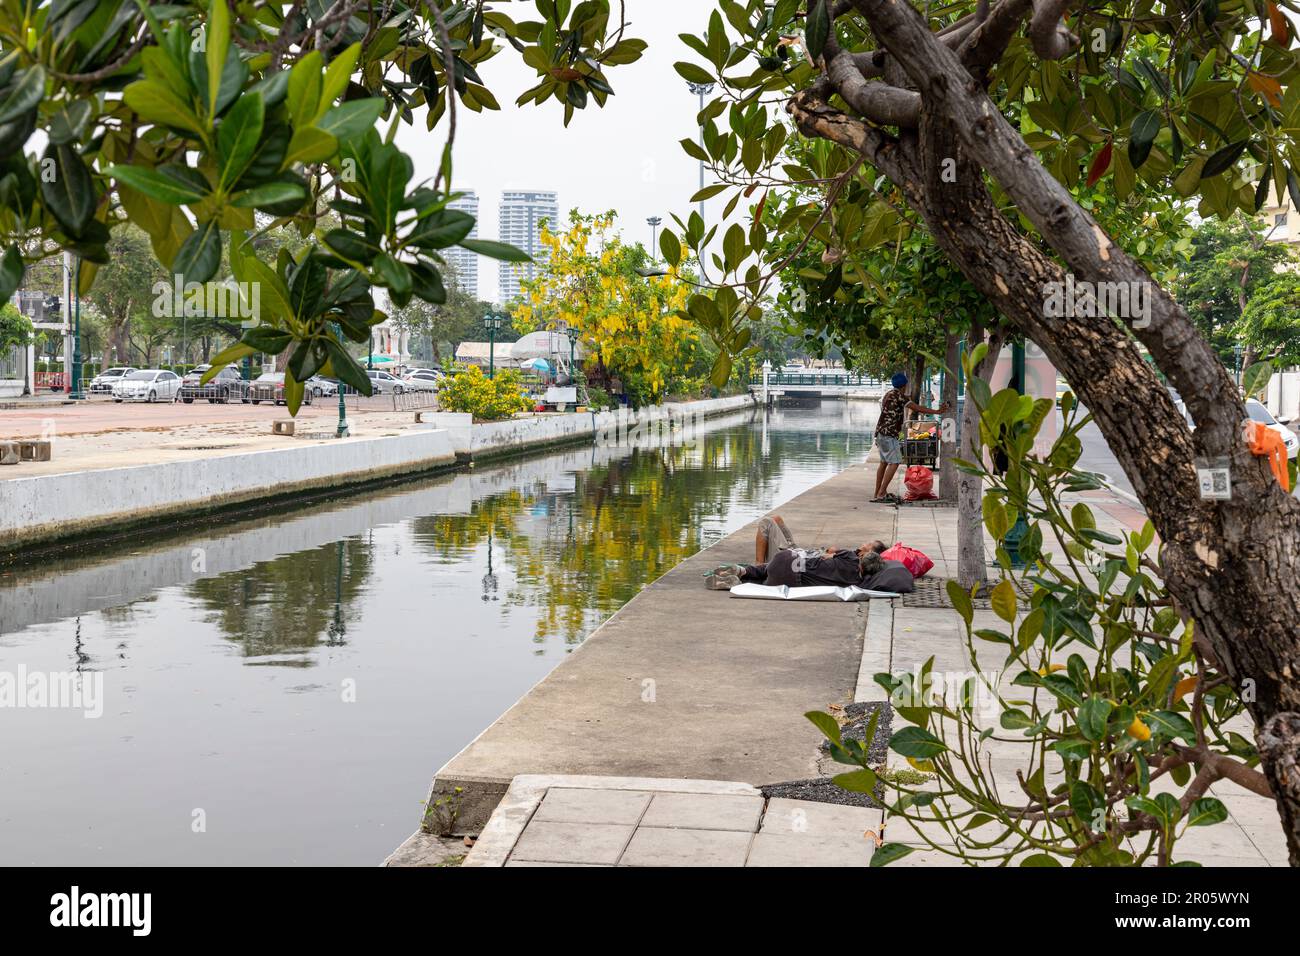 Bangkok,Thailand - April 16, 2023: If coming to Bangkok, you will be able to see homeless people resting on the sidewalks along the Khlong Lot. in fro Stock Photo